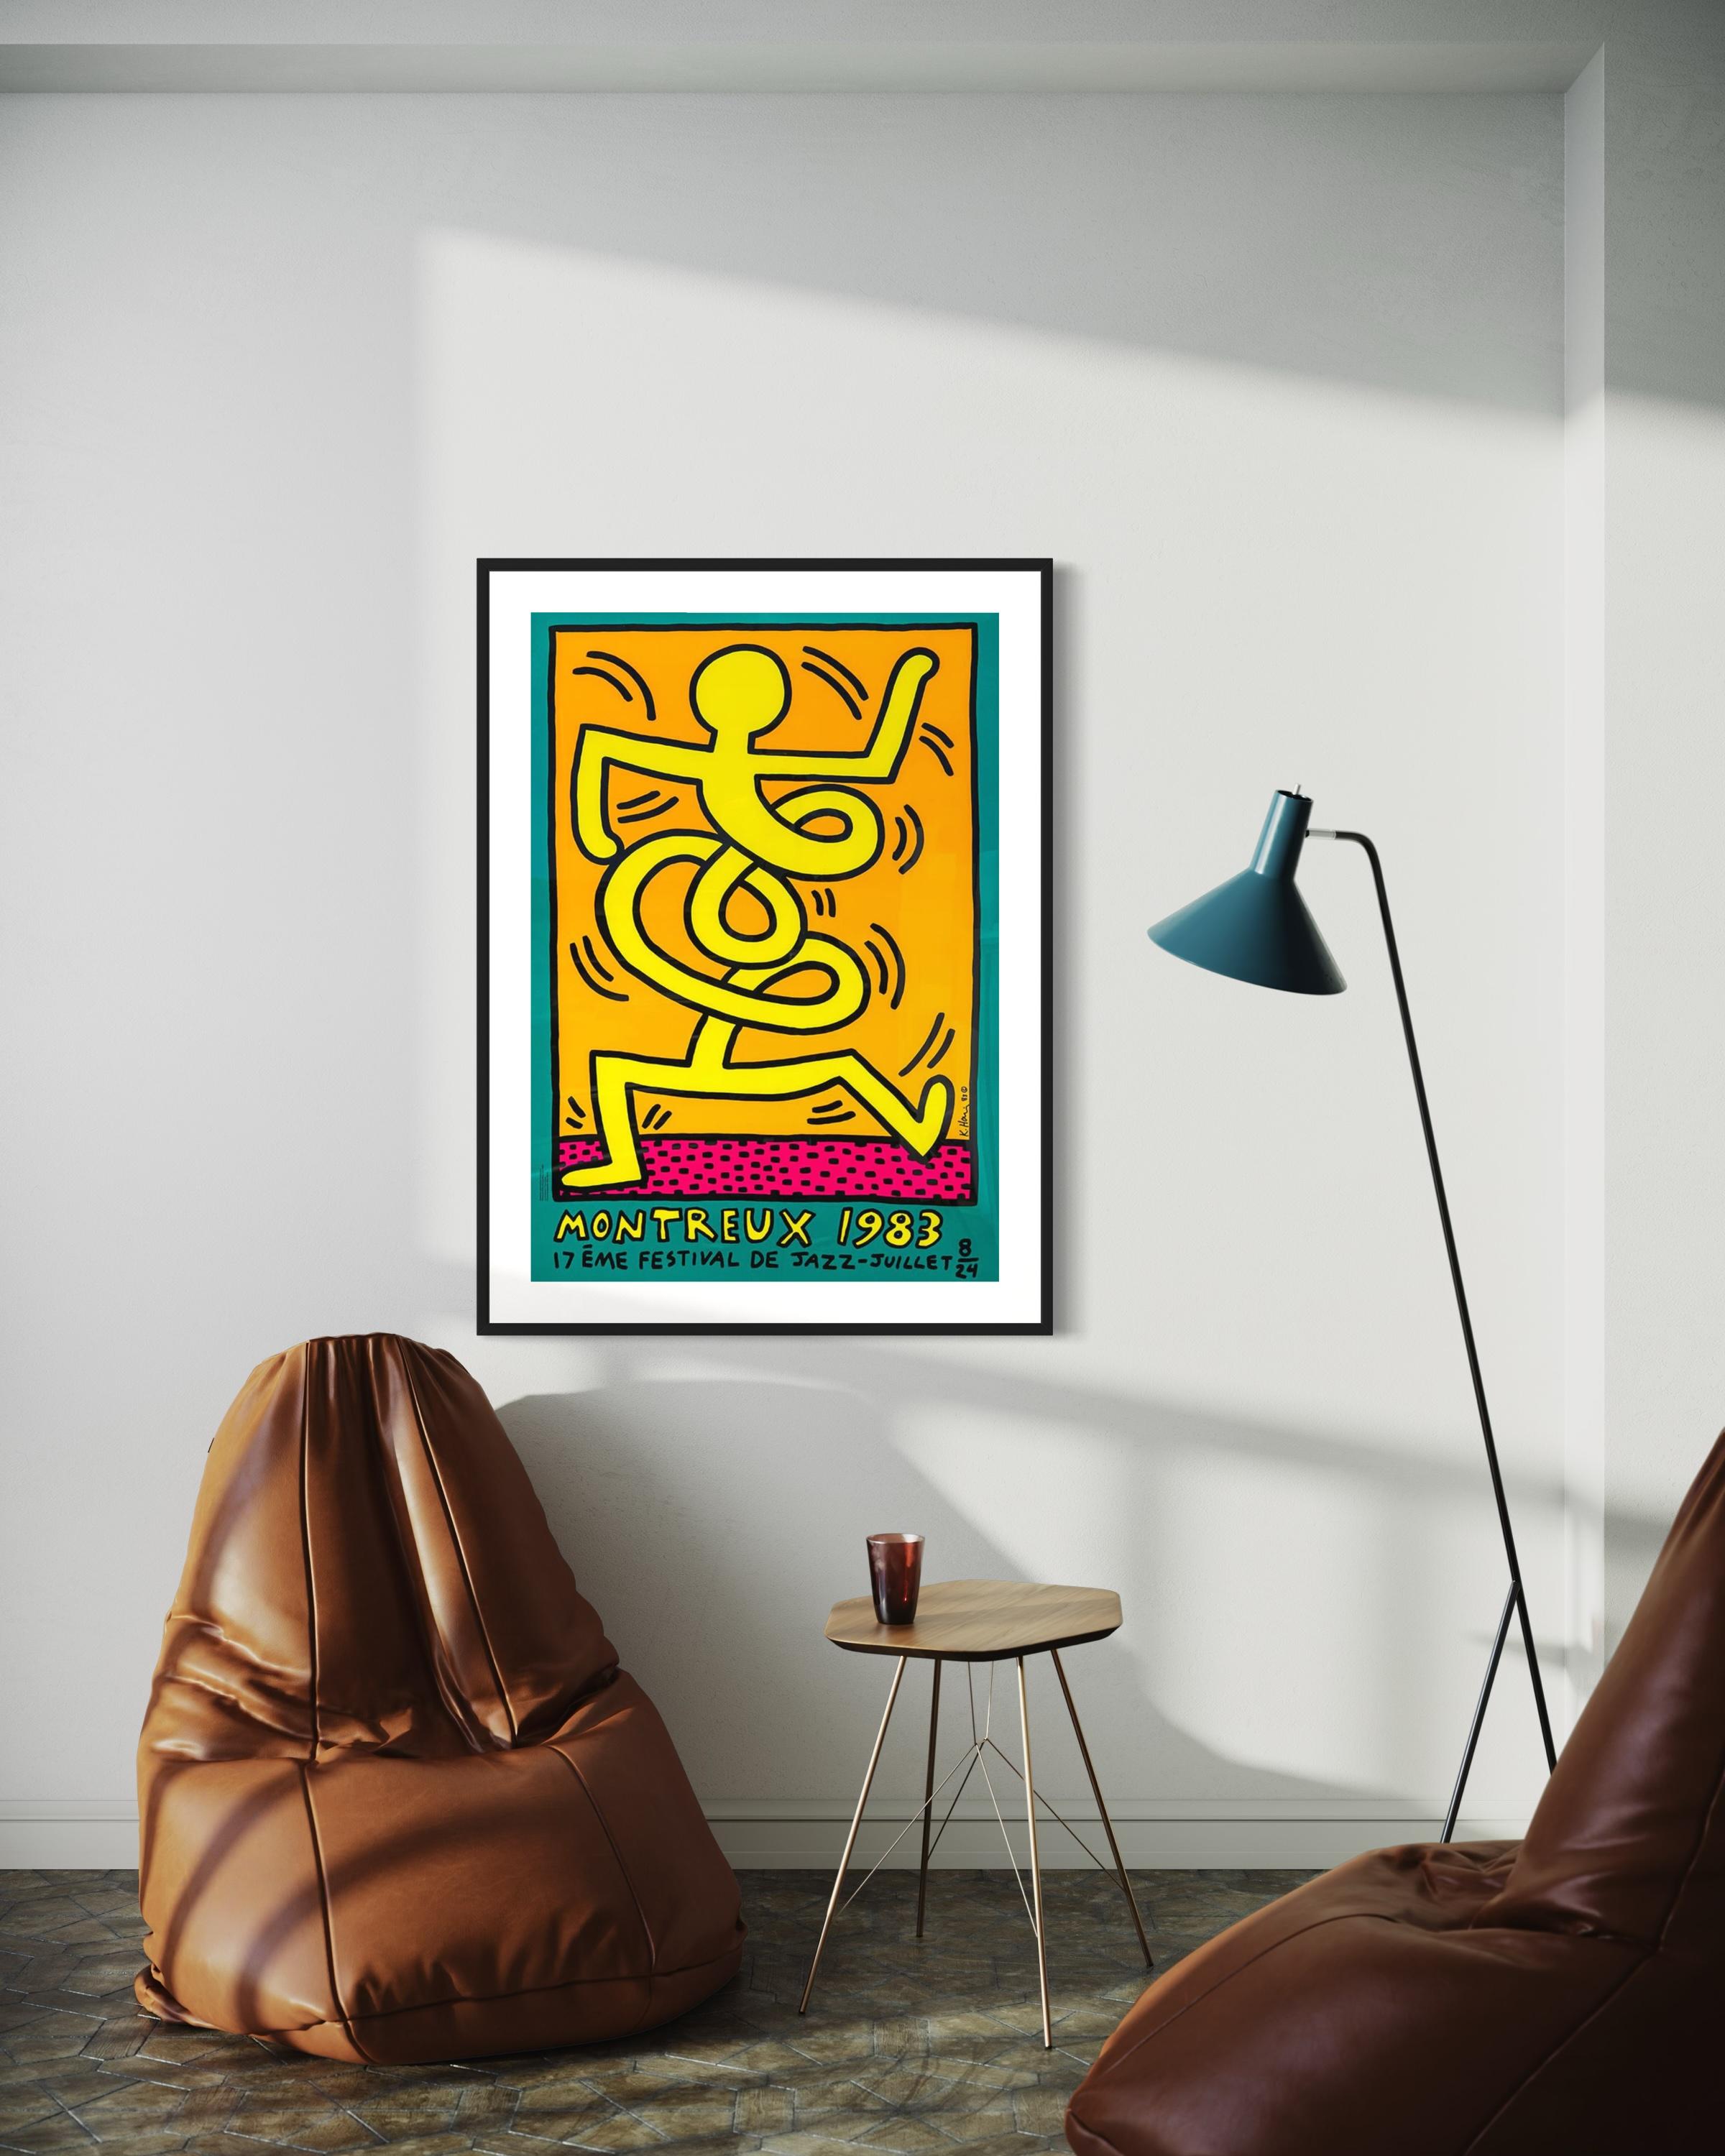 Montreux Jazz Festival 1983 (Green) - Pop Art Print by Keith Haring